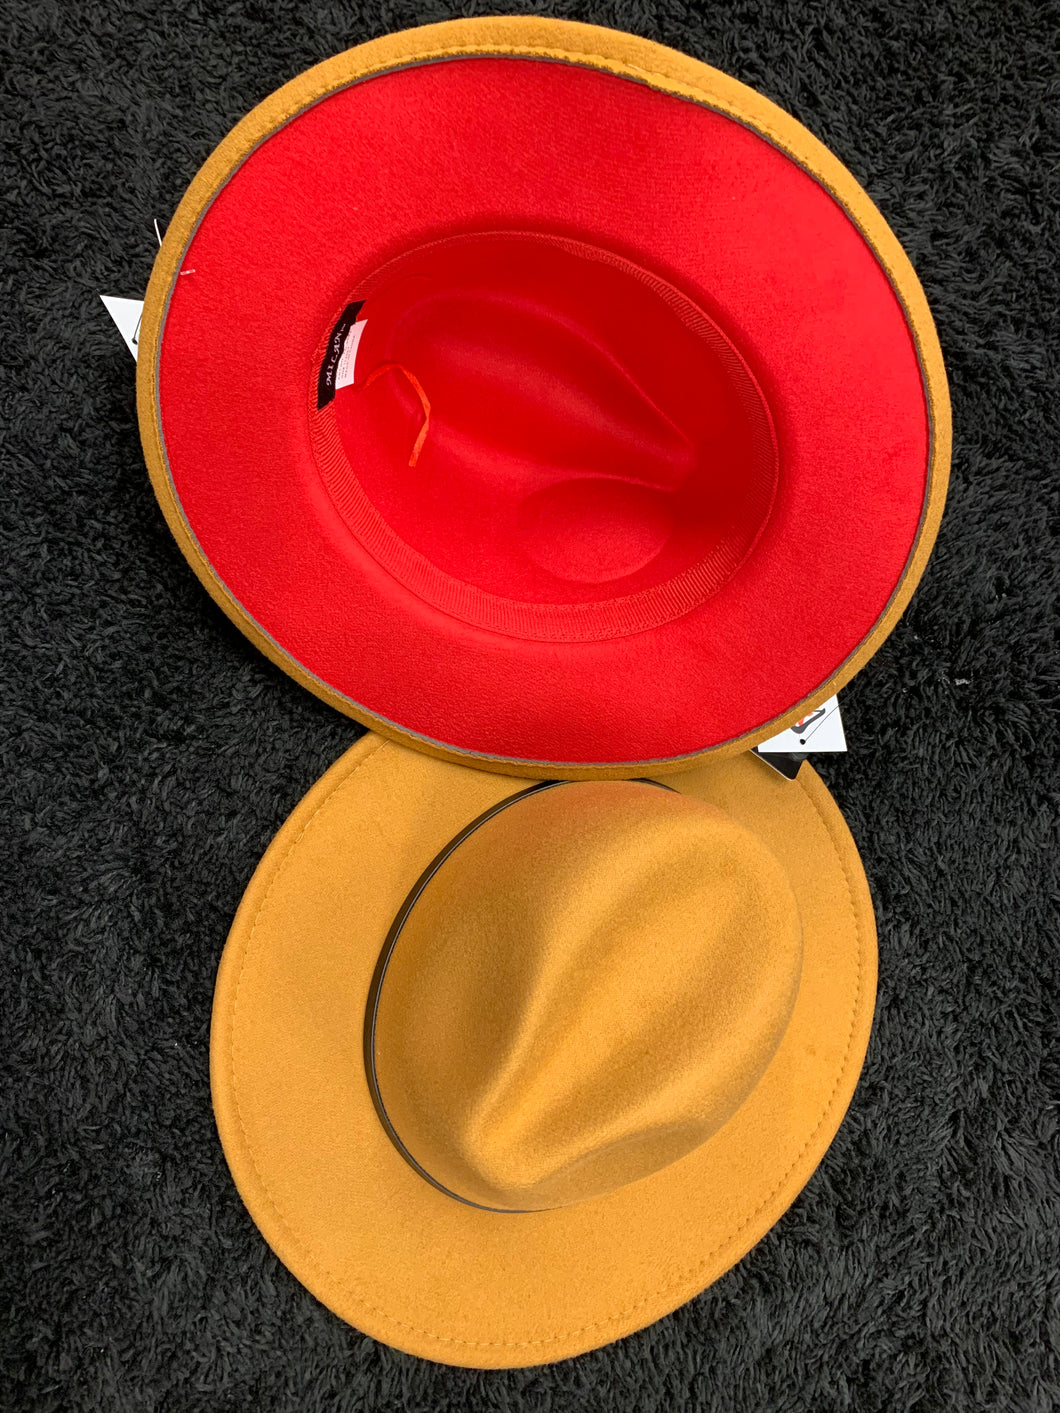 Mustard Fedora Hat with Red Bottom Adjustable Strings inside Hat